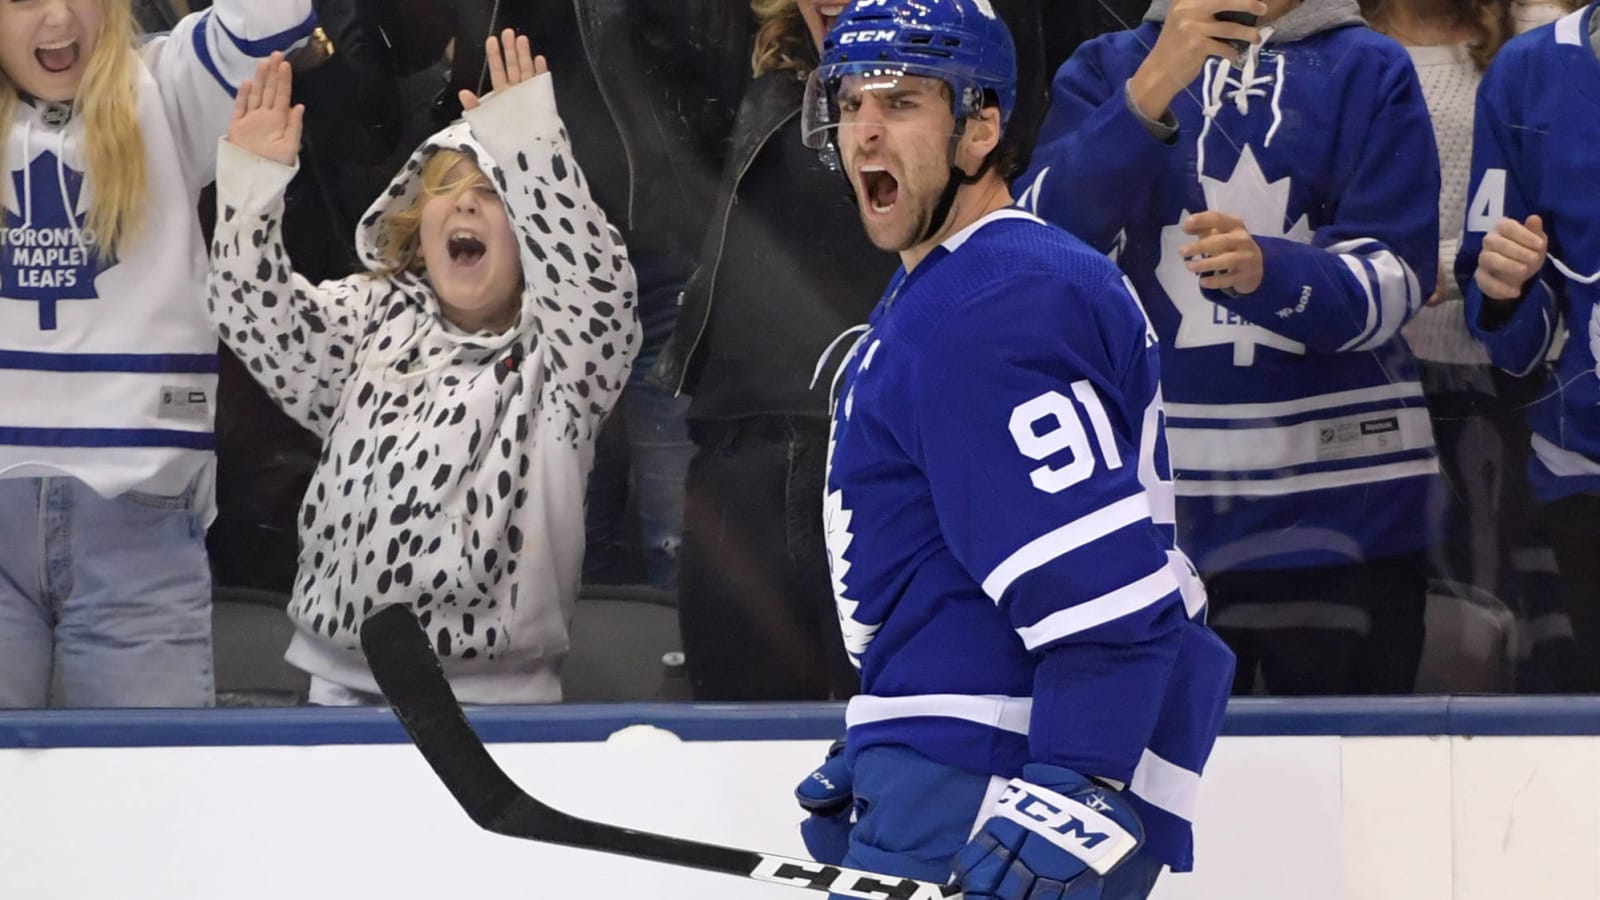 The 'Maple Leafs to score 40 goals' quiz